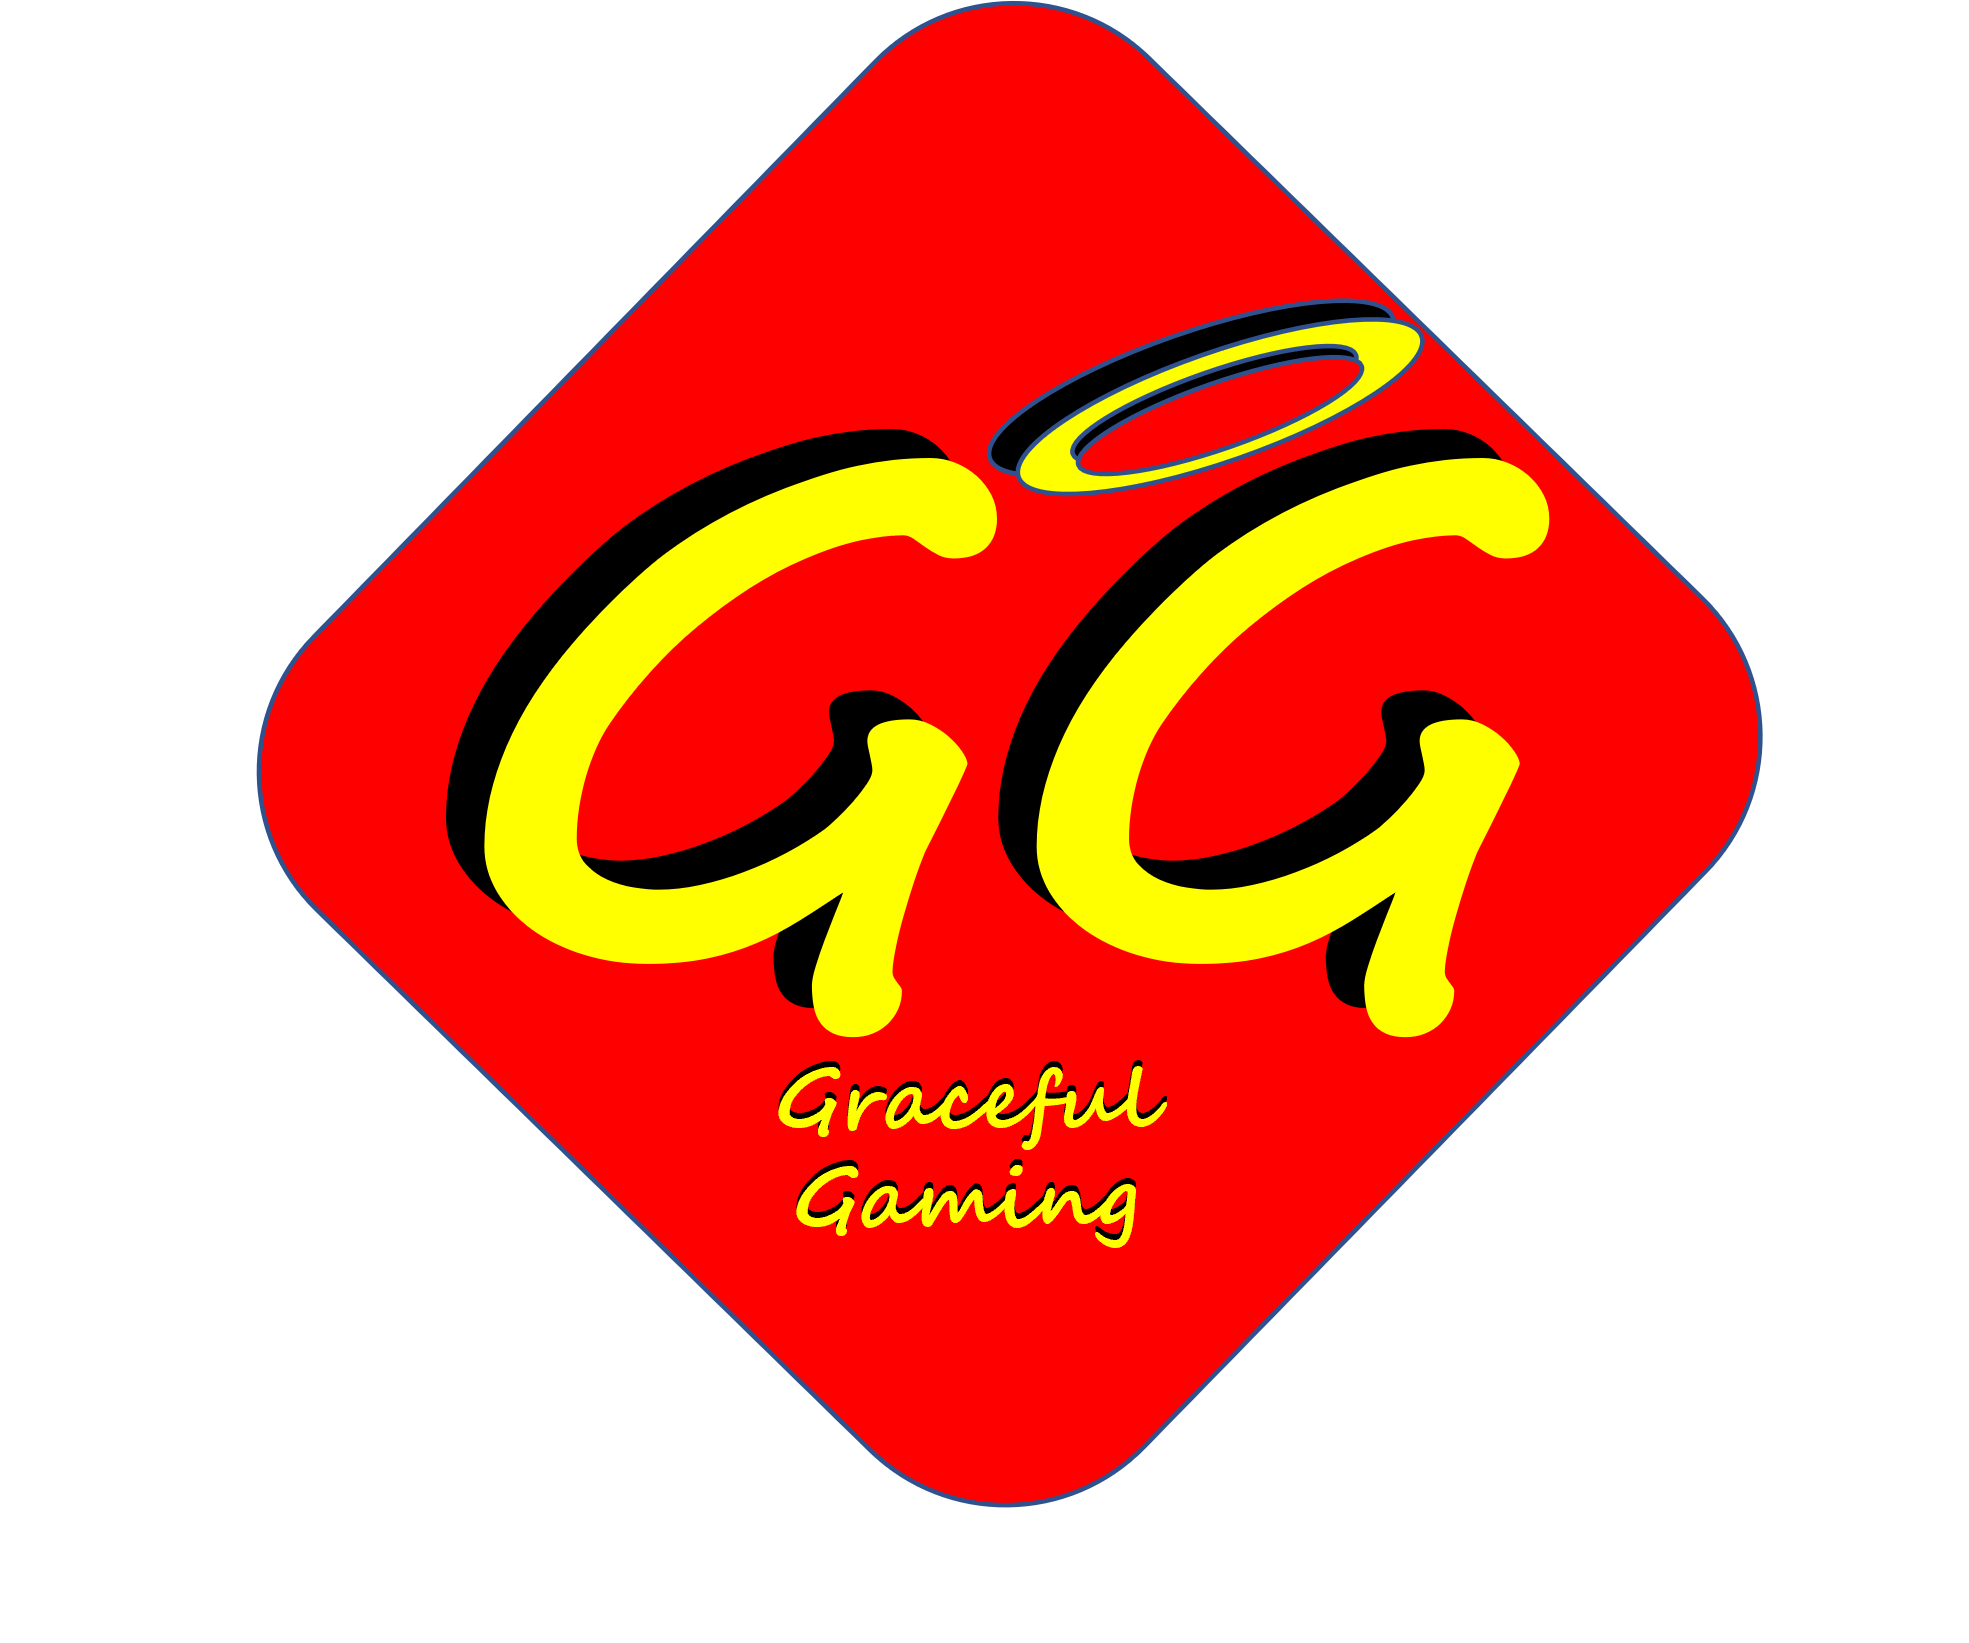 Are you a passionate gamer looking for an exciting and immersive gaming  experience? Look no further! [Cs gaming] is here to provide you with  top-notch gaming content that will keep you entertained